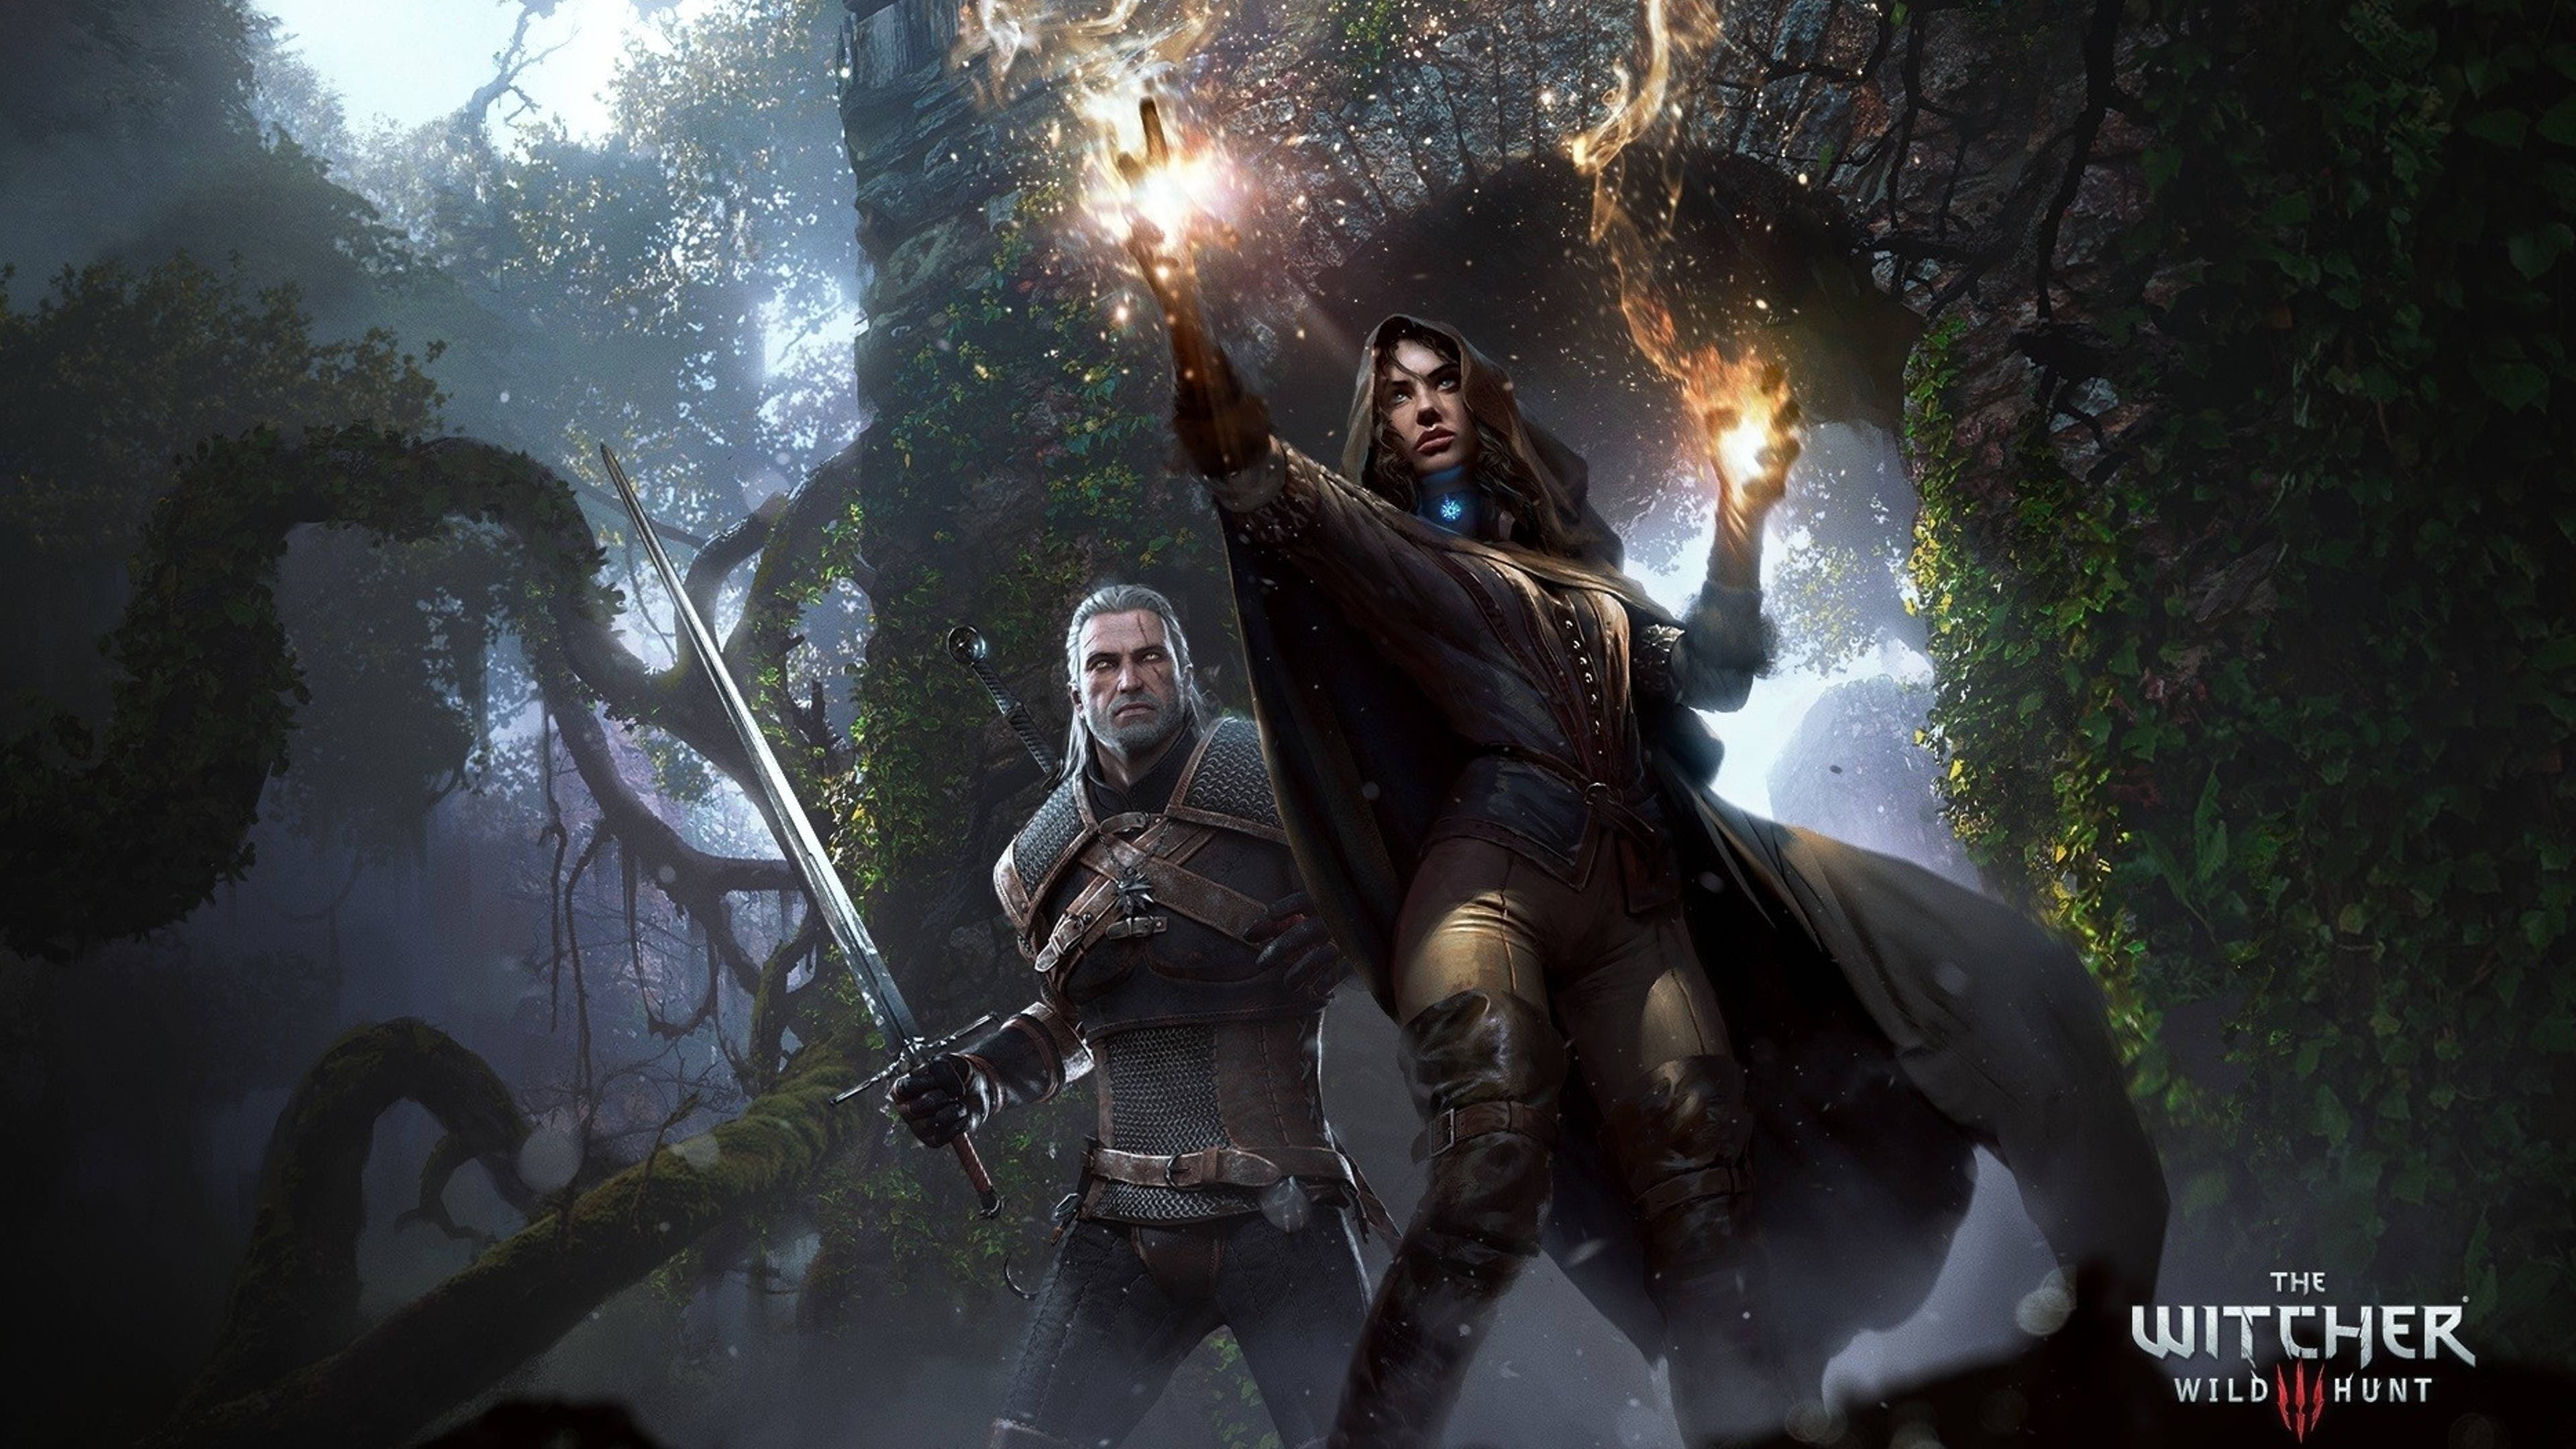 Video Games The Witcher The Witcher 3 Wild Hunt Geralt Of Rivia Mythology Darkness Screenshot Computer 3840x2160